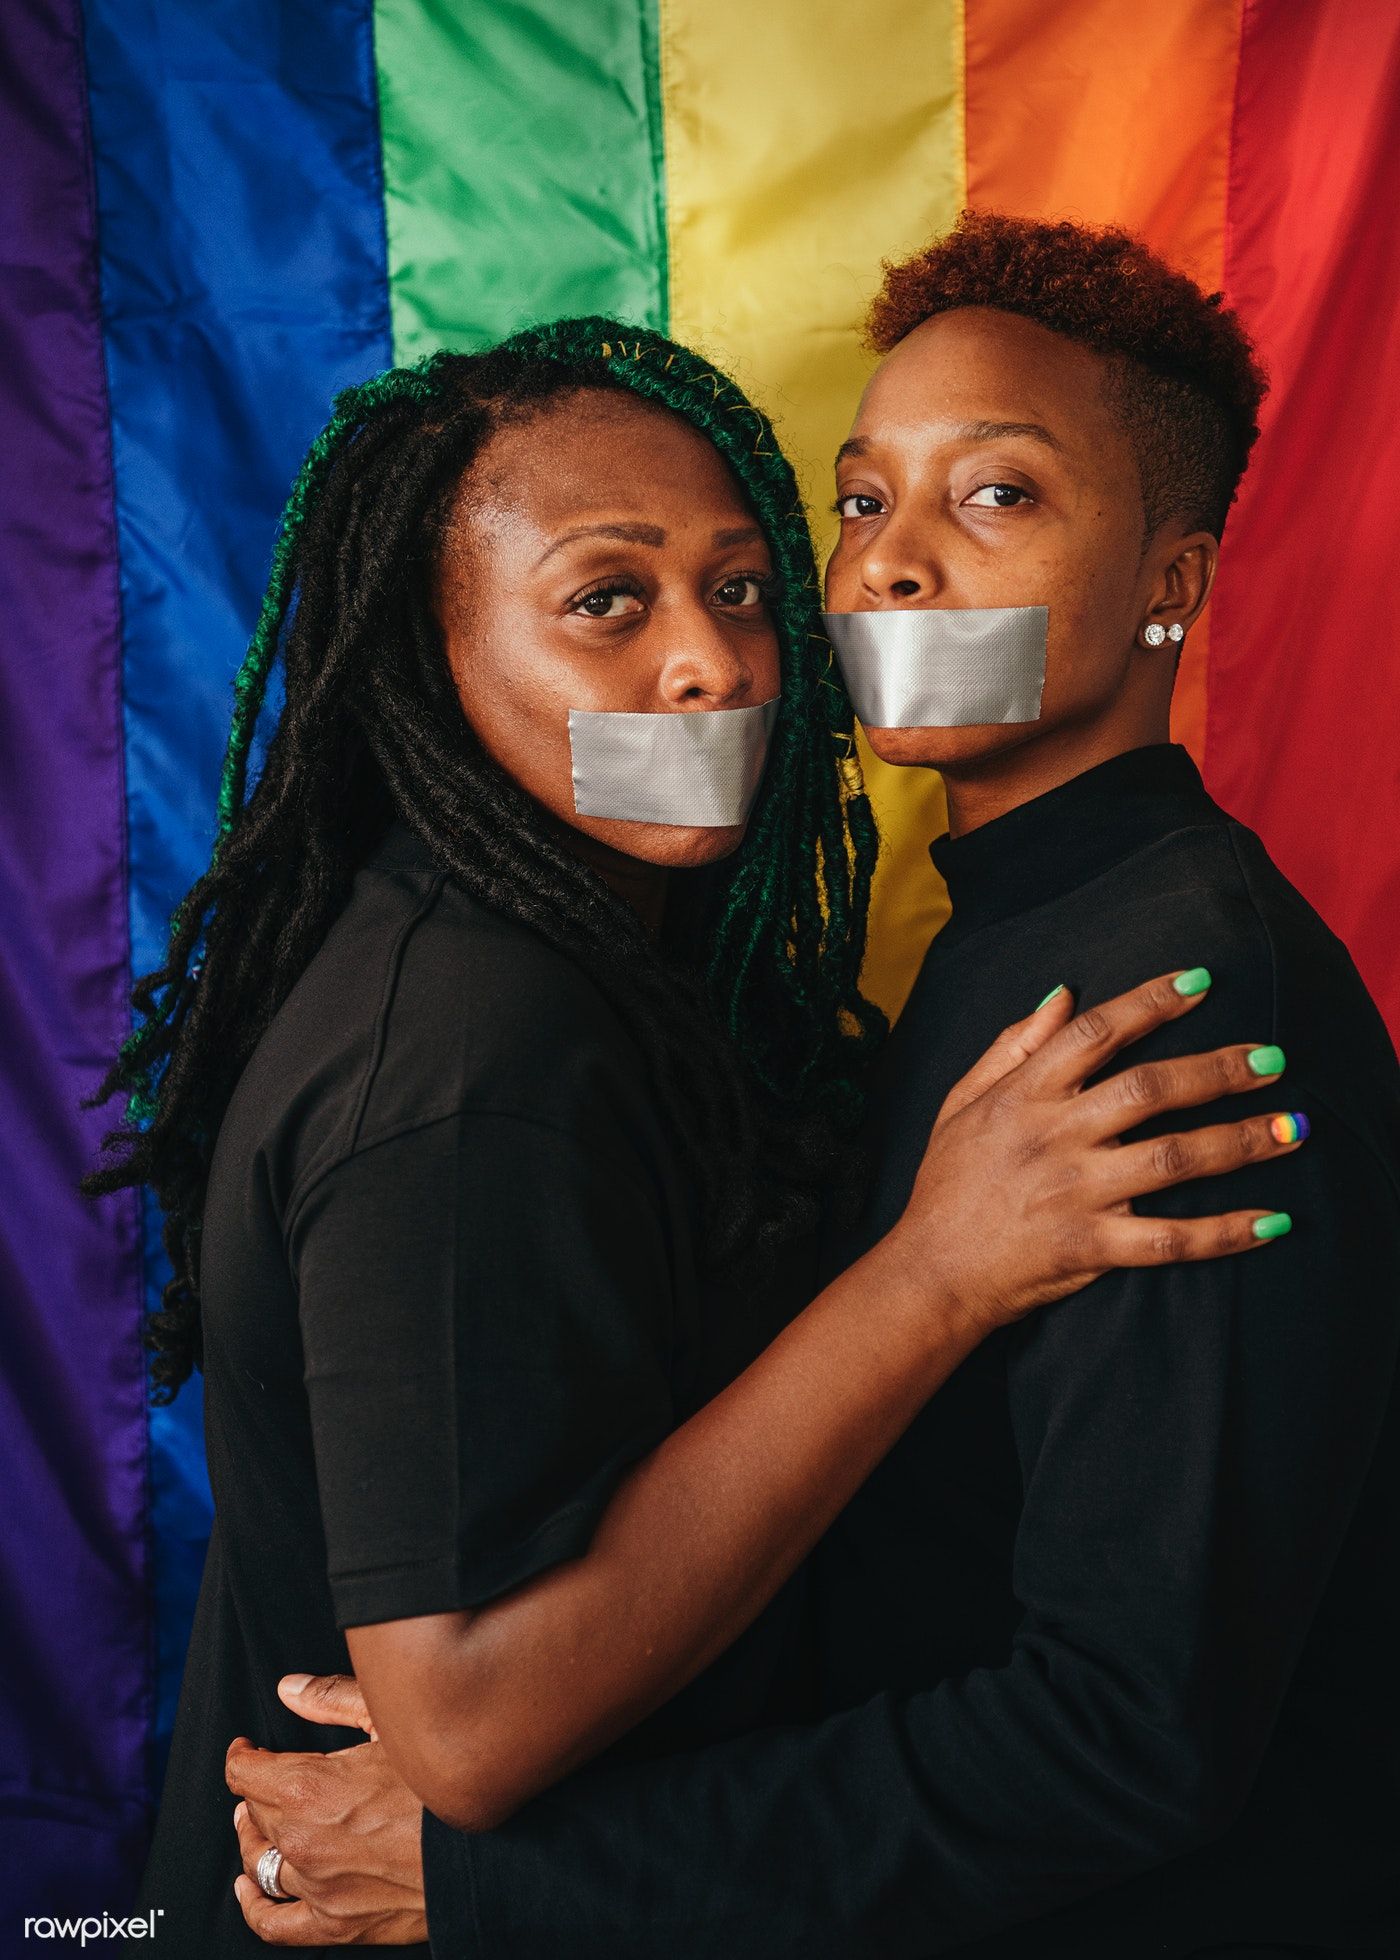 Download premium image of Lesbian couple wearing tapes on their mouth